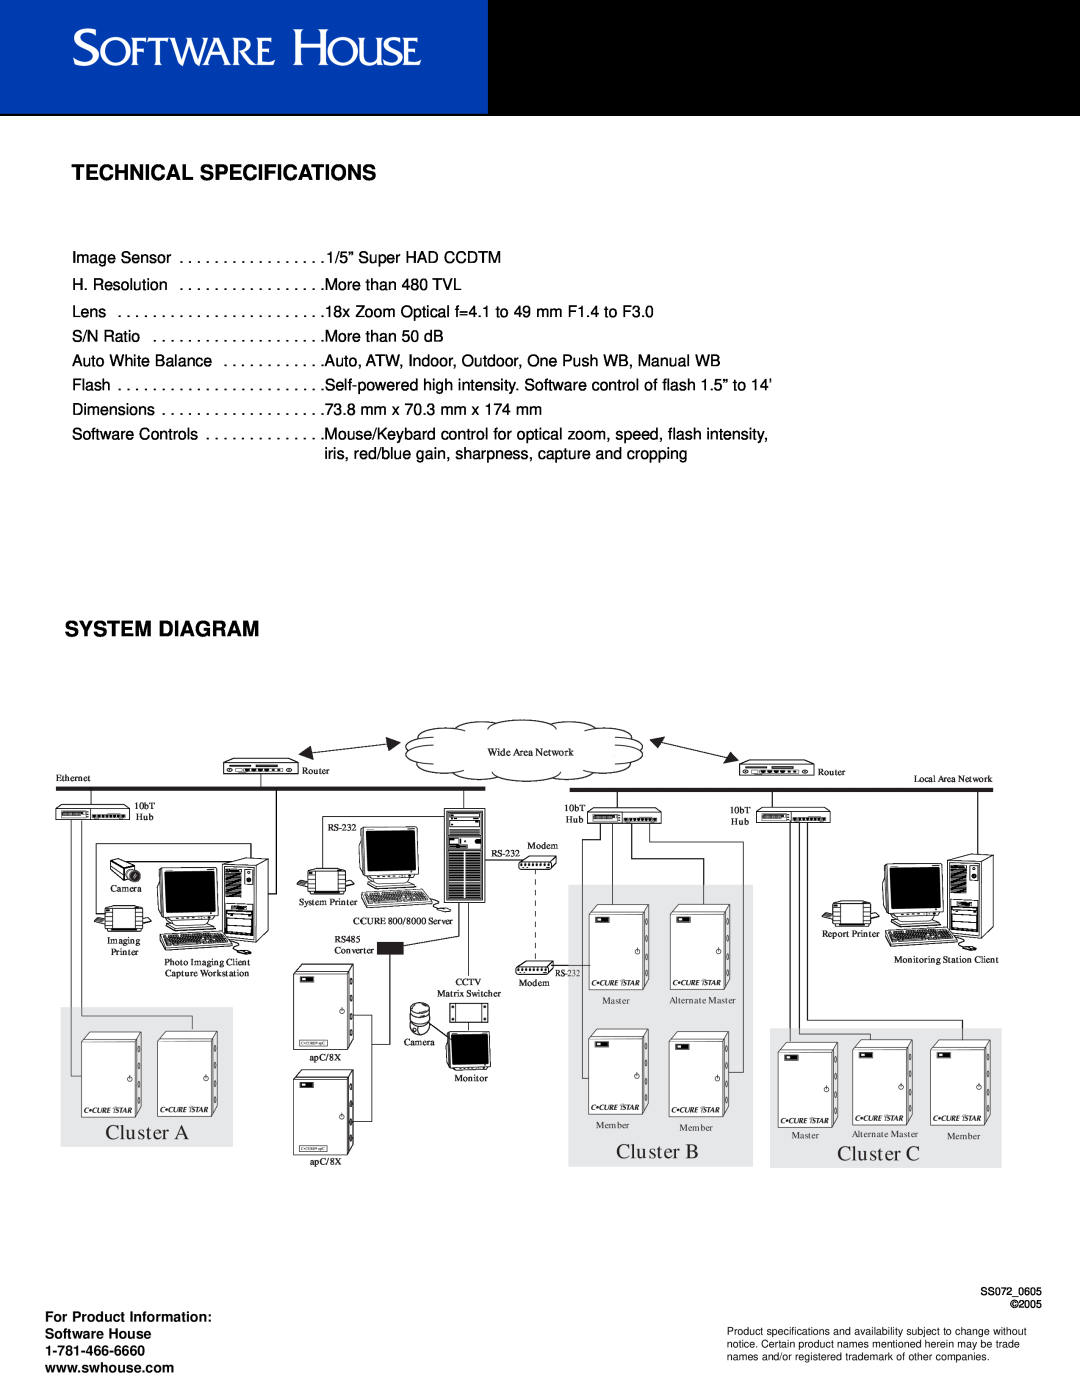 Tyco VA-3 manual Technical Specifications, System Diagram, Cluster A, Cluster B, Cluster C 